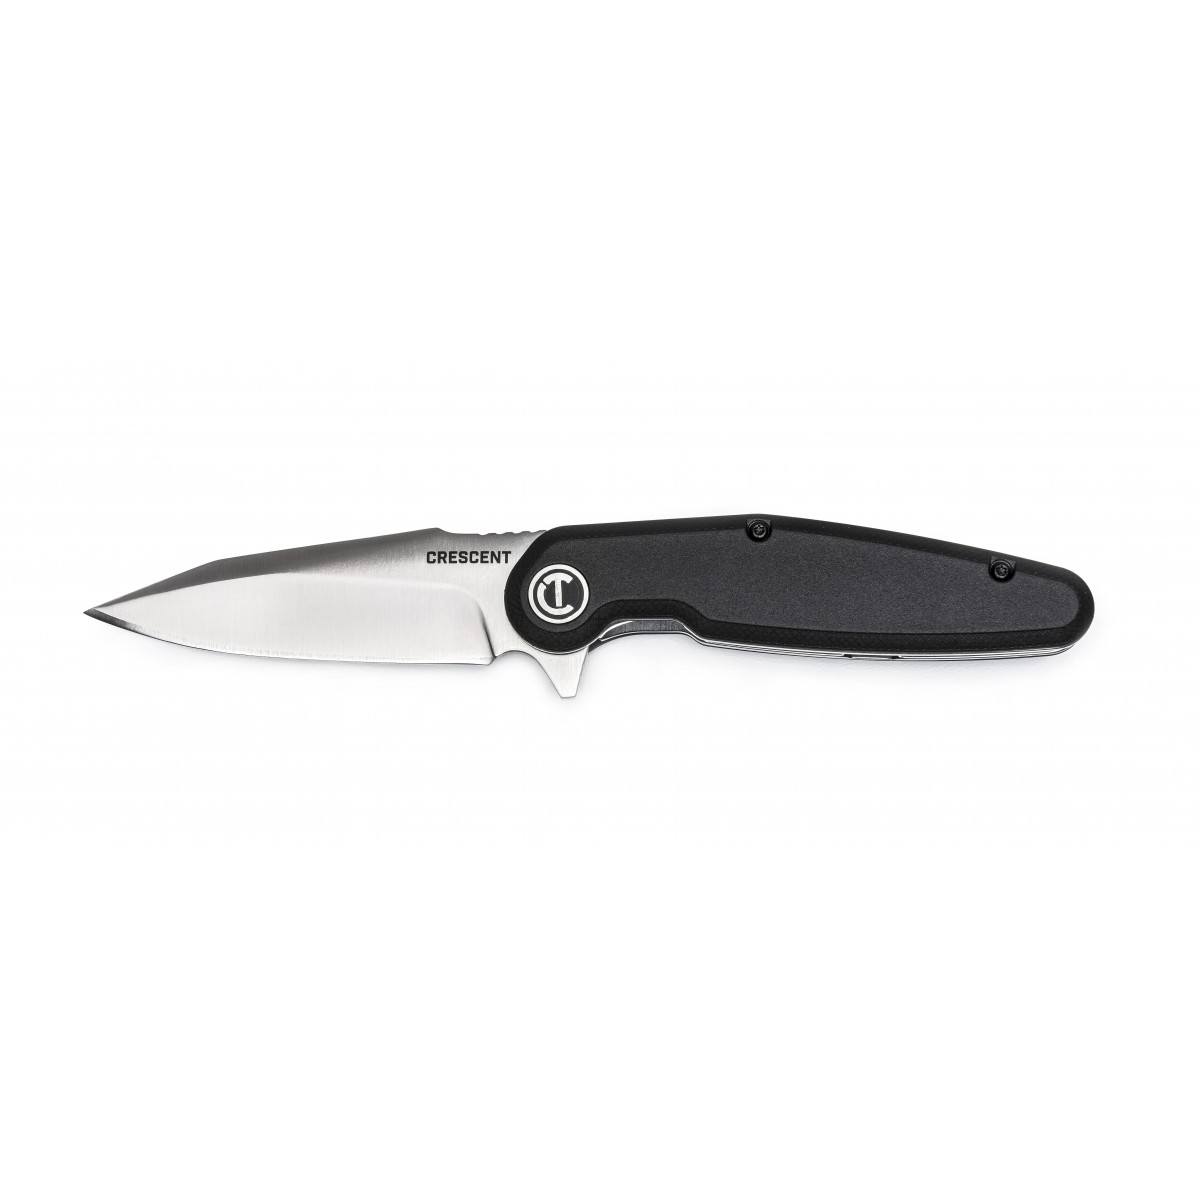 CPK350C Pocket Knife, 3-1/2 in L Blade, 1 in W Blade, Stainless Steel Blade, Straight, Ergonomic Handle